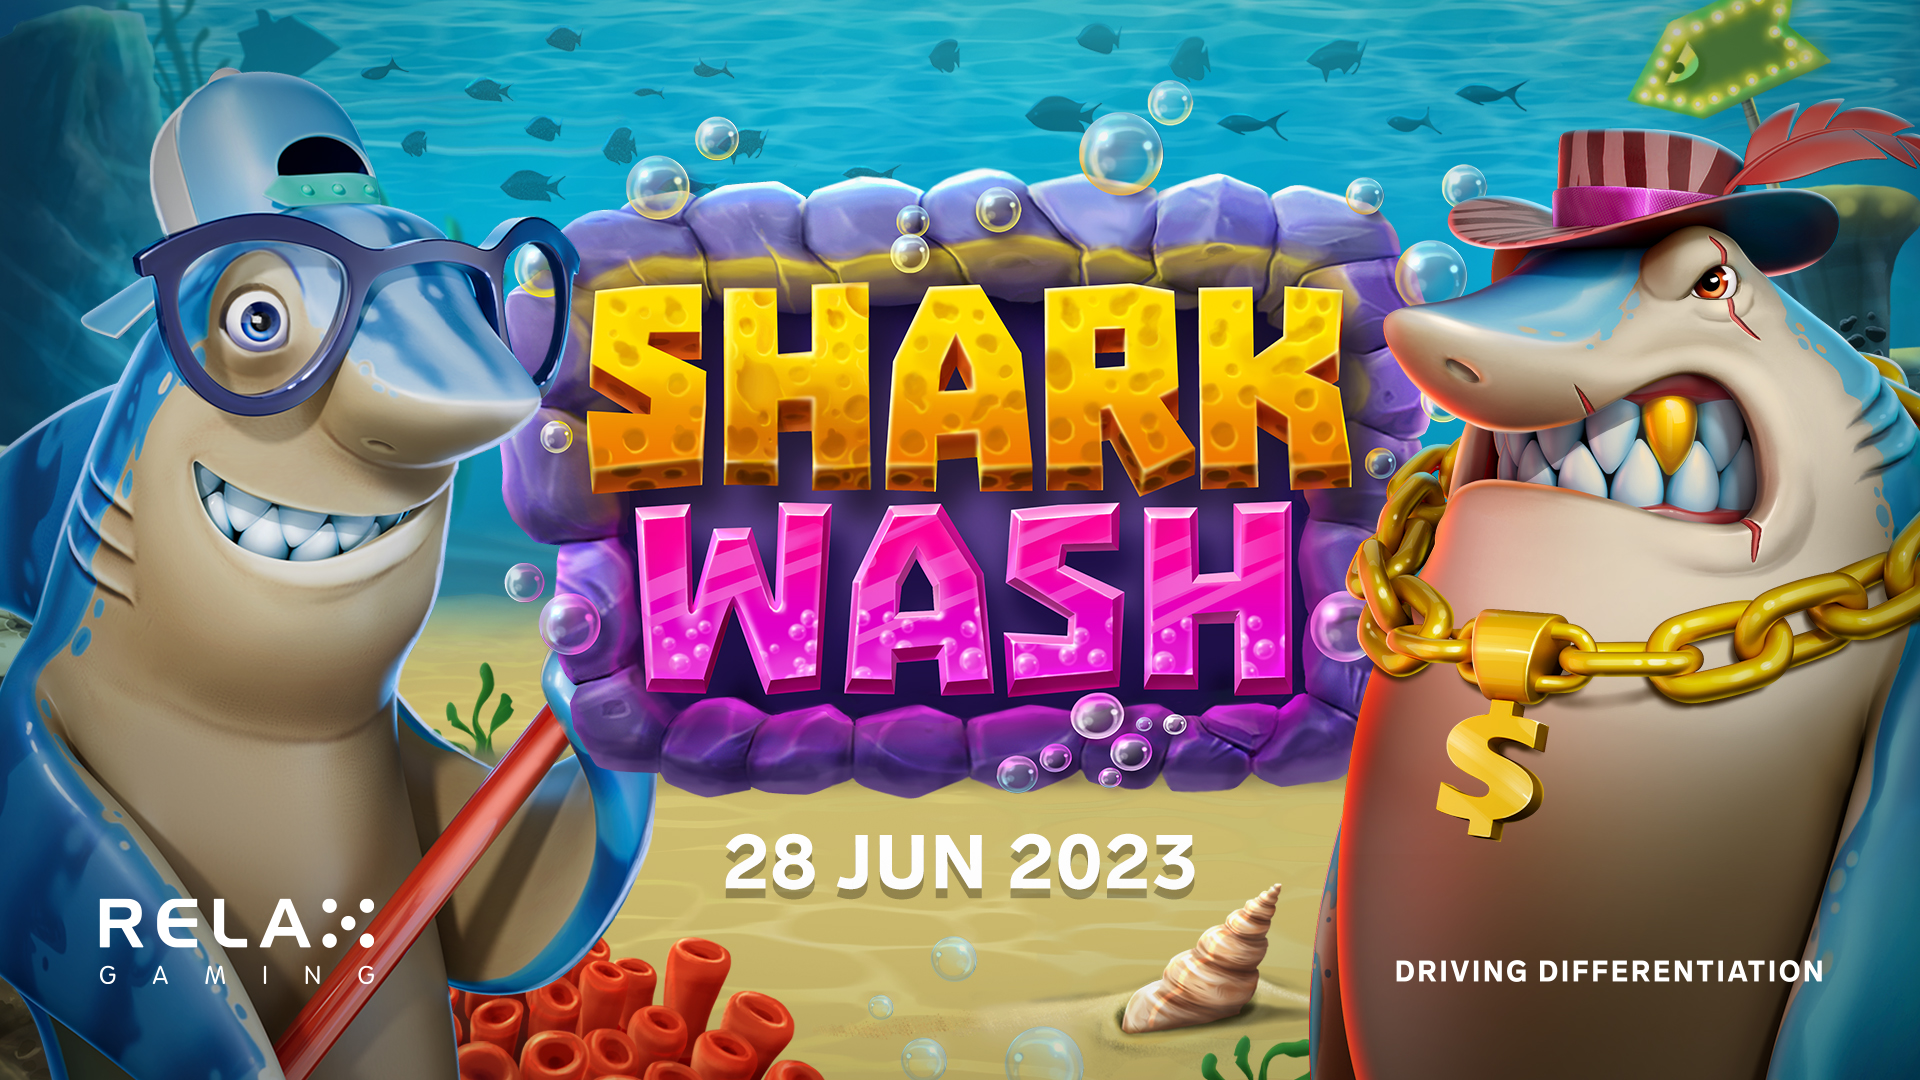 Relax Gaming set to shine with new release Shark Wash